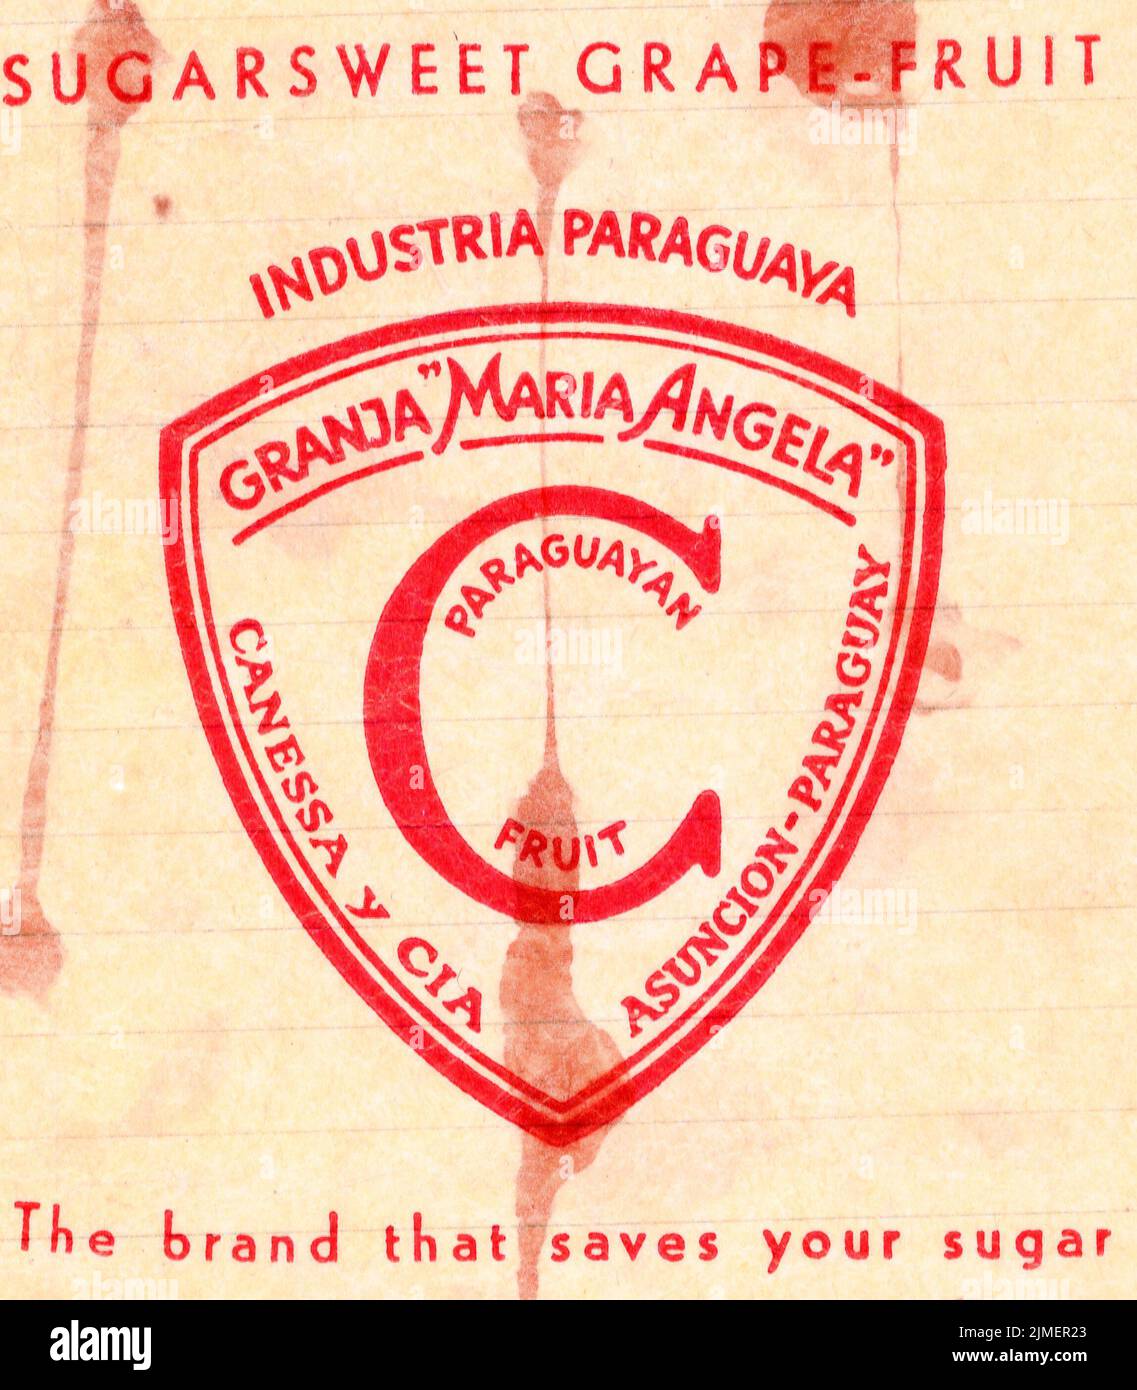 Fresh fruit tissue paper wrapper, from mid-1950s England, with grower's trade mark.Granja Maria Angela, Industria Parguaya, sugarsweet grapefruit. Red Stock Photo